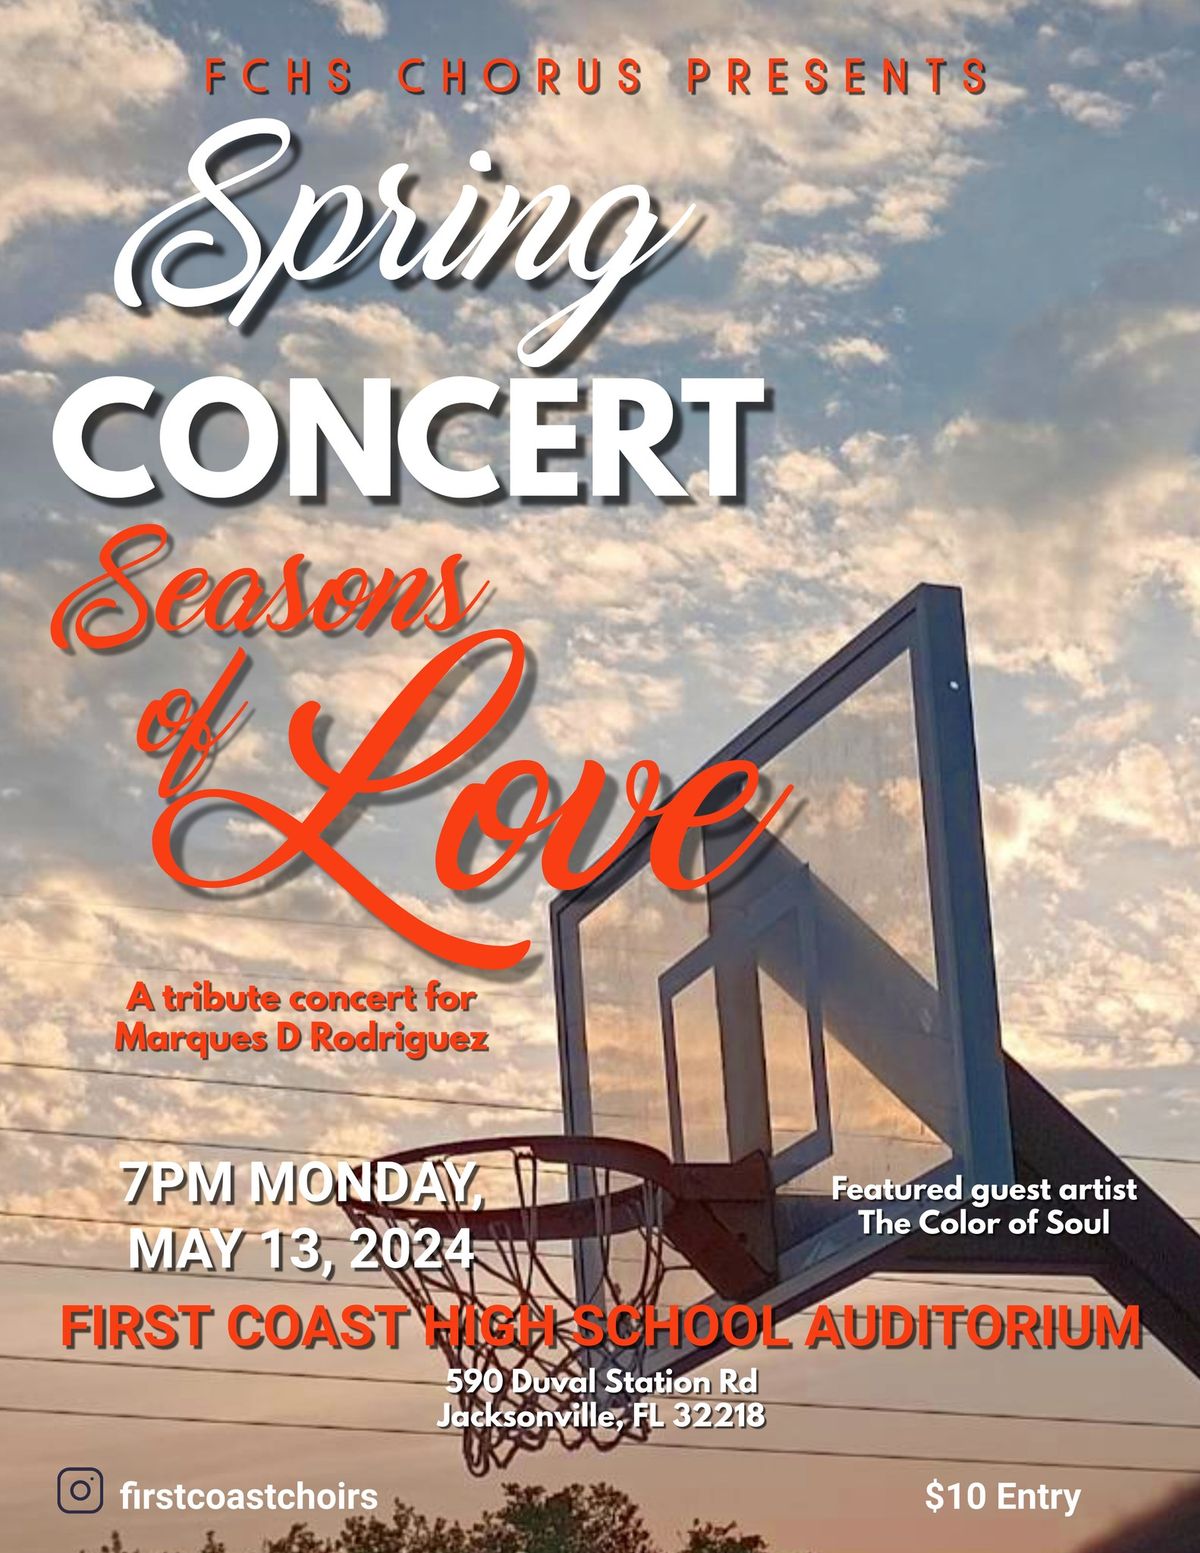 Spring Concert: Seasons of Love, tribute concert for Marques D Rodriguez